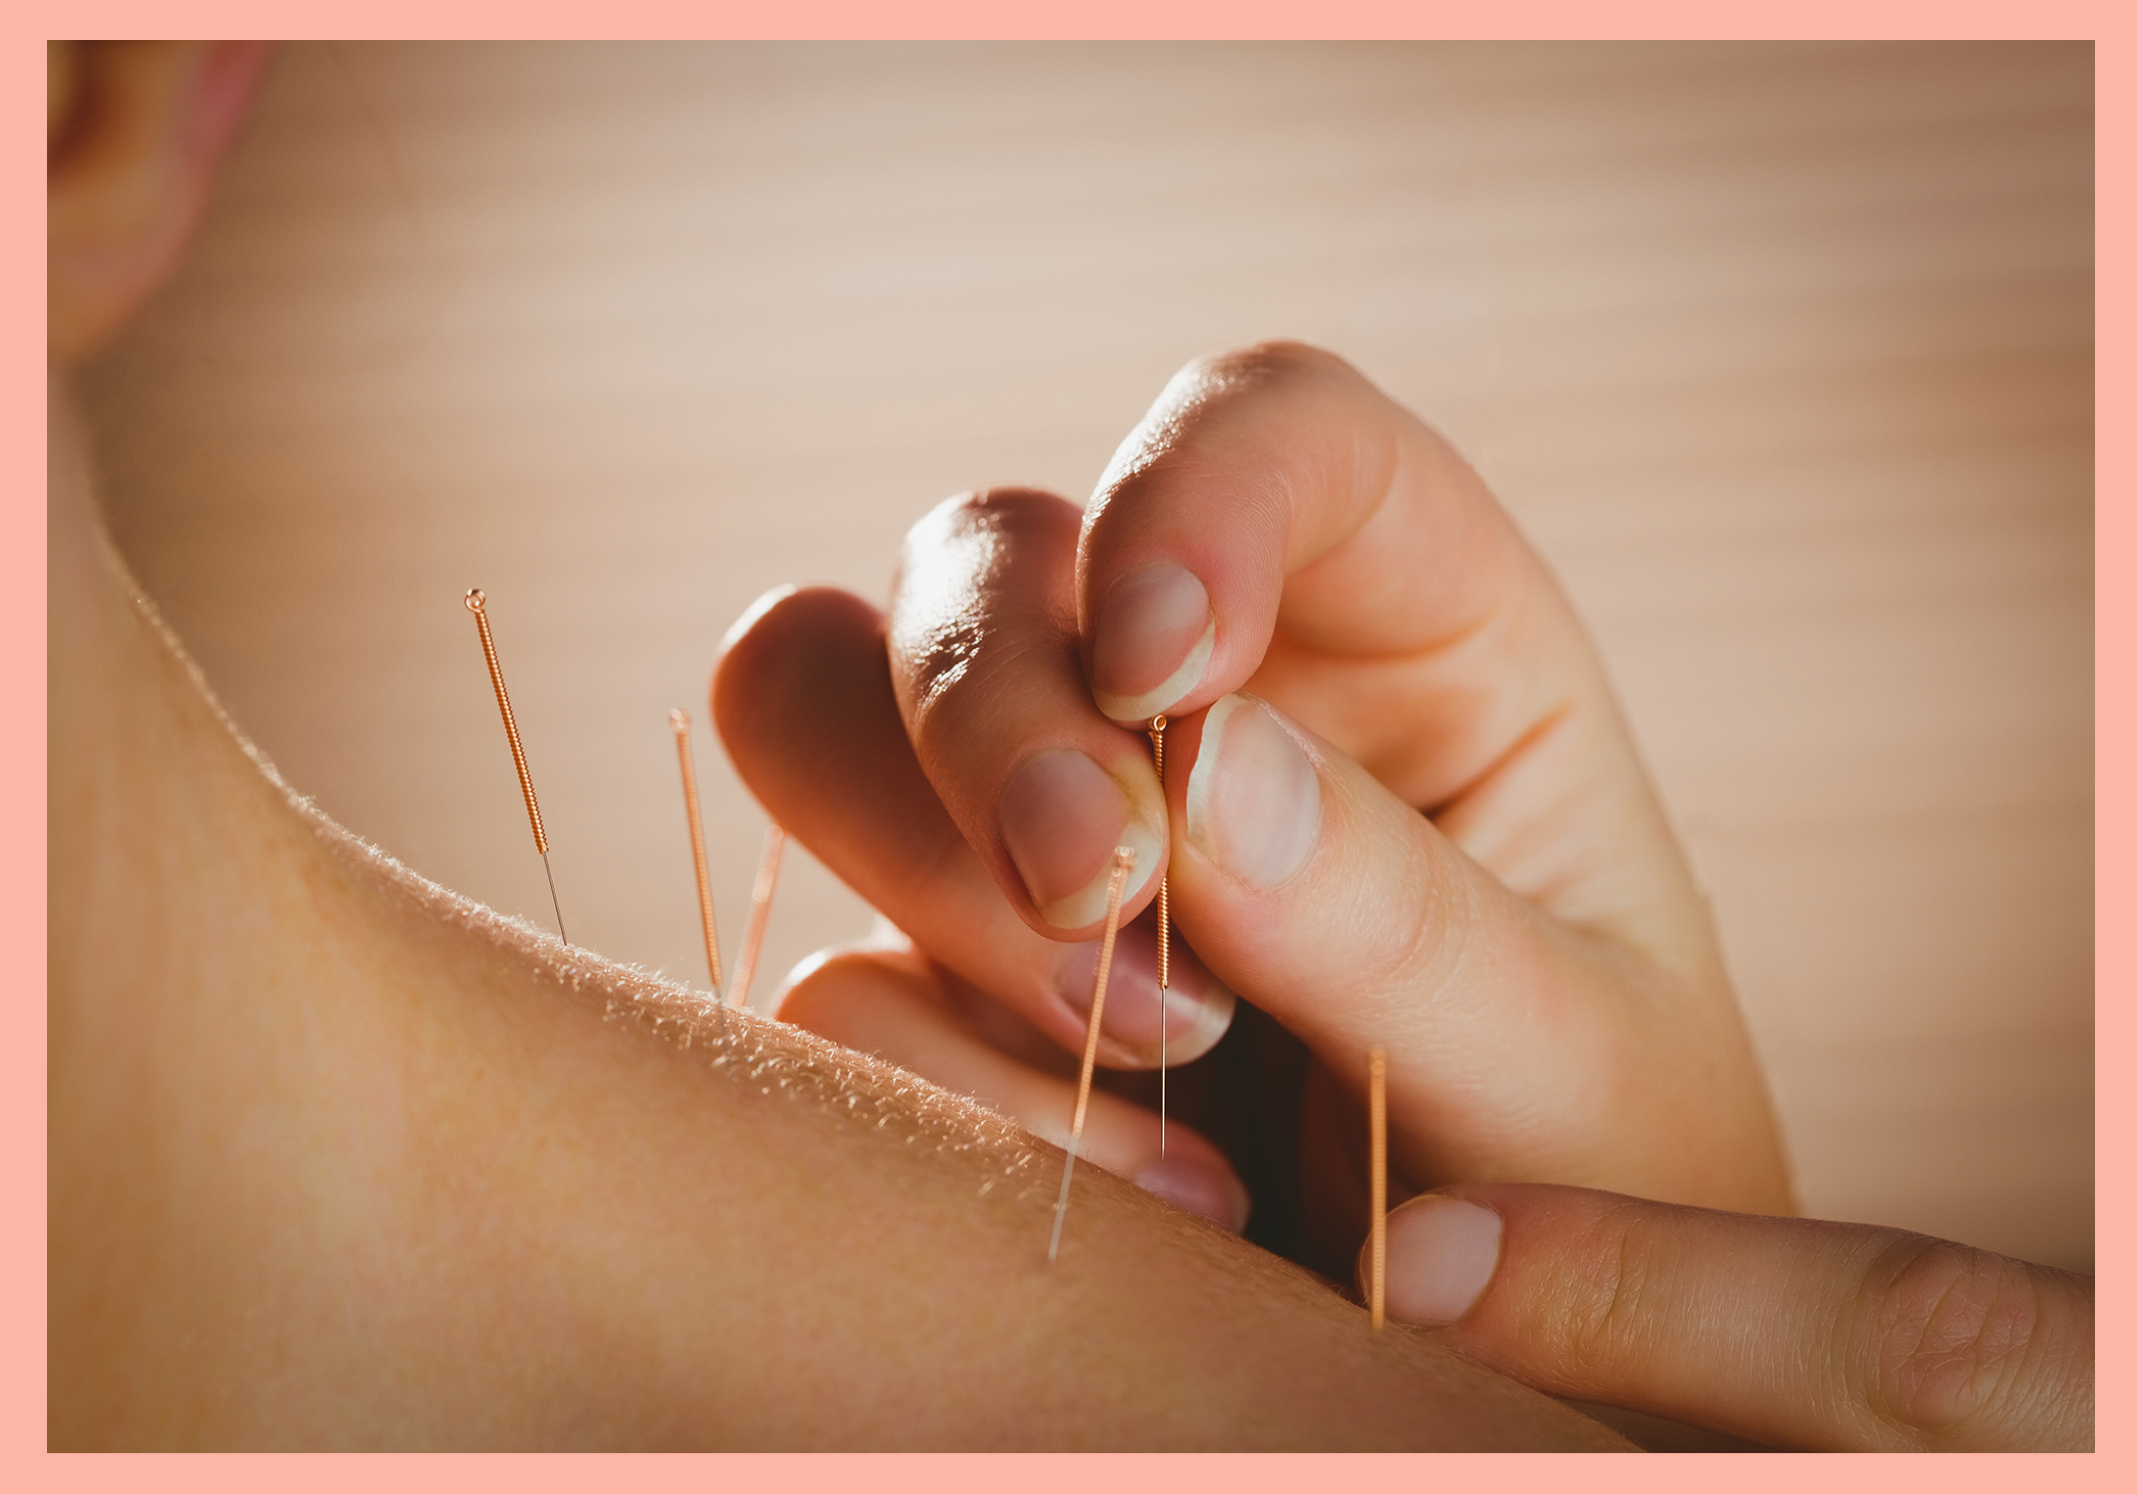 Can Acupuncture Help With Menopause Symptoms?